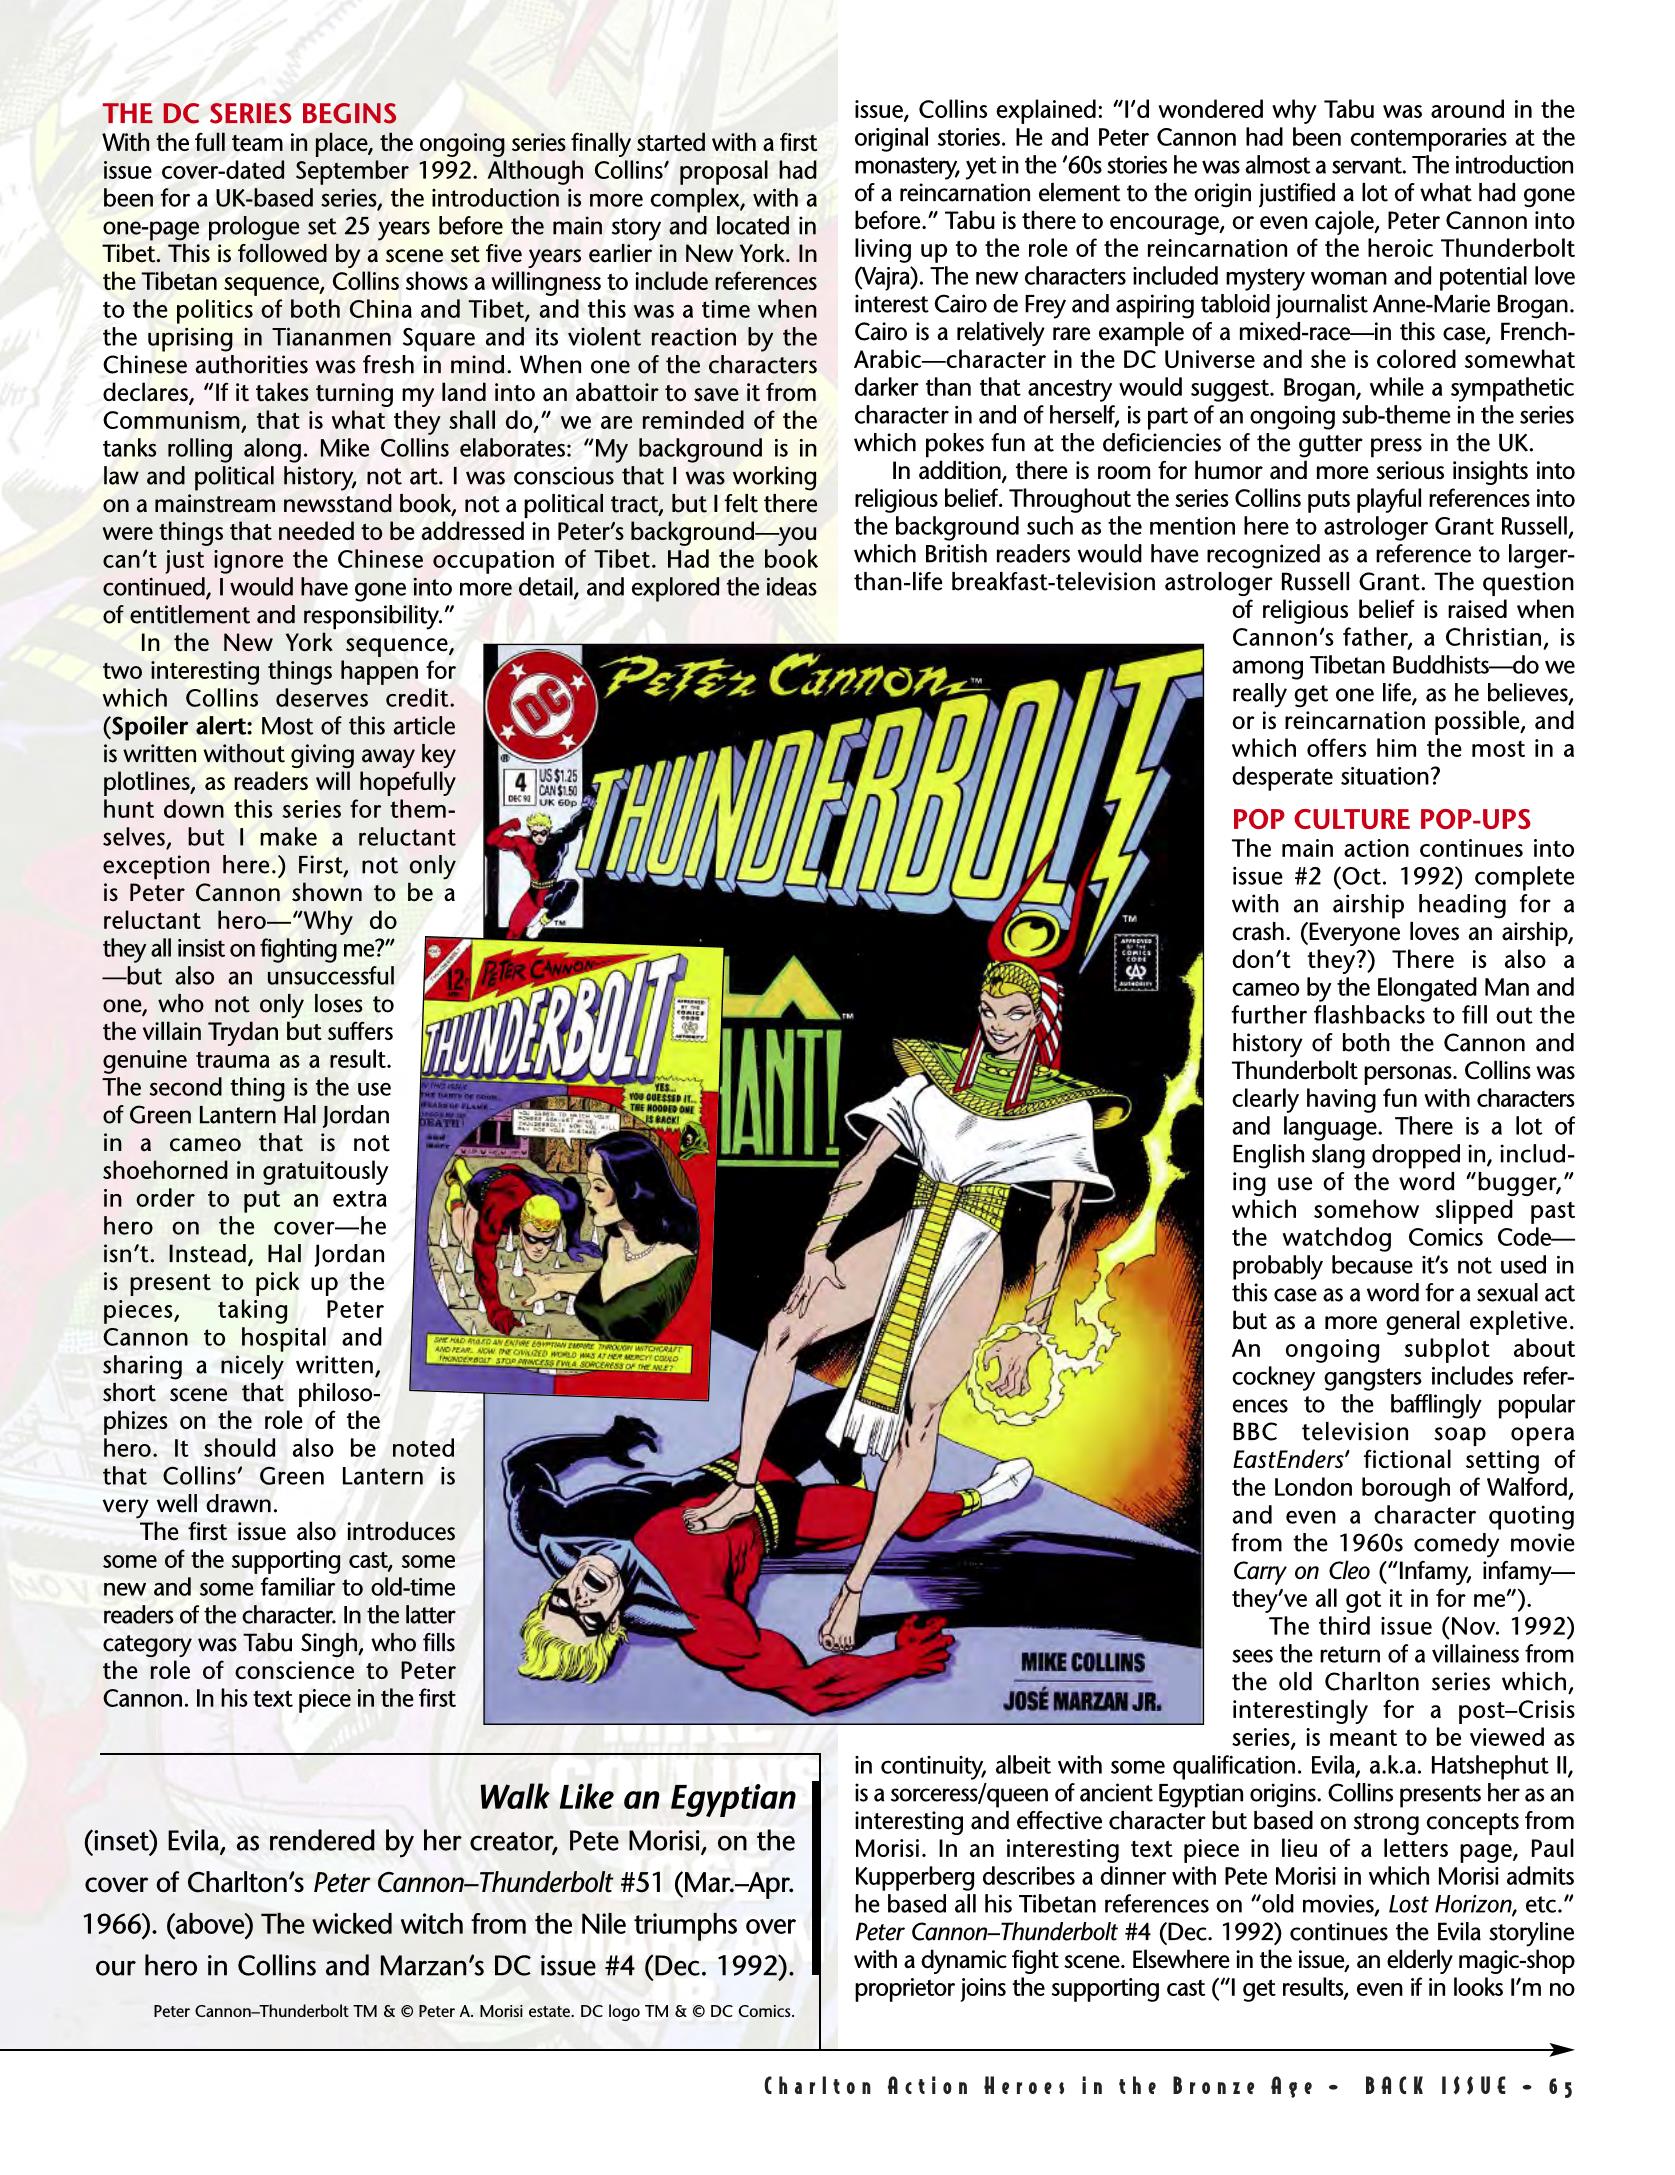 Read online Back Issue comic -  Issue #79 - 67